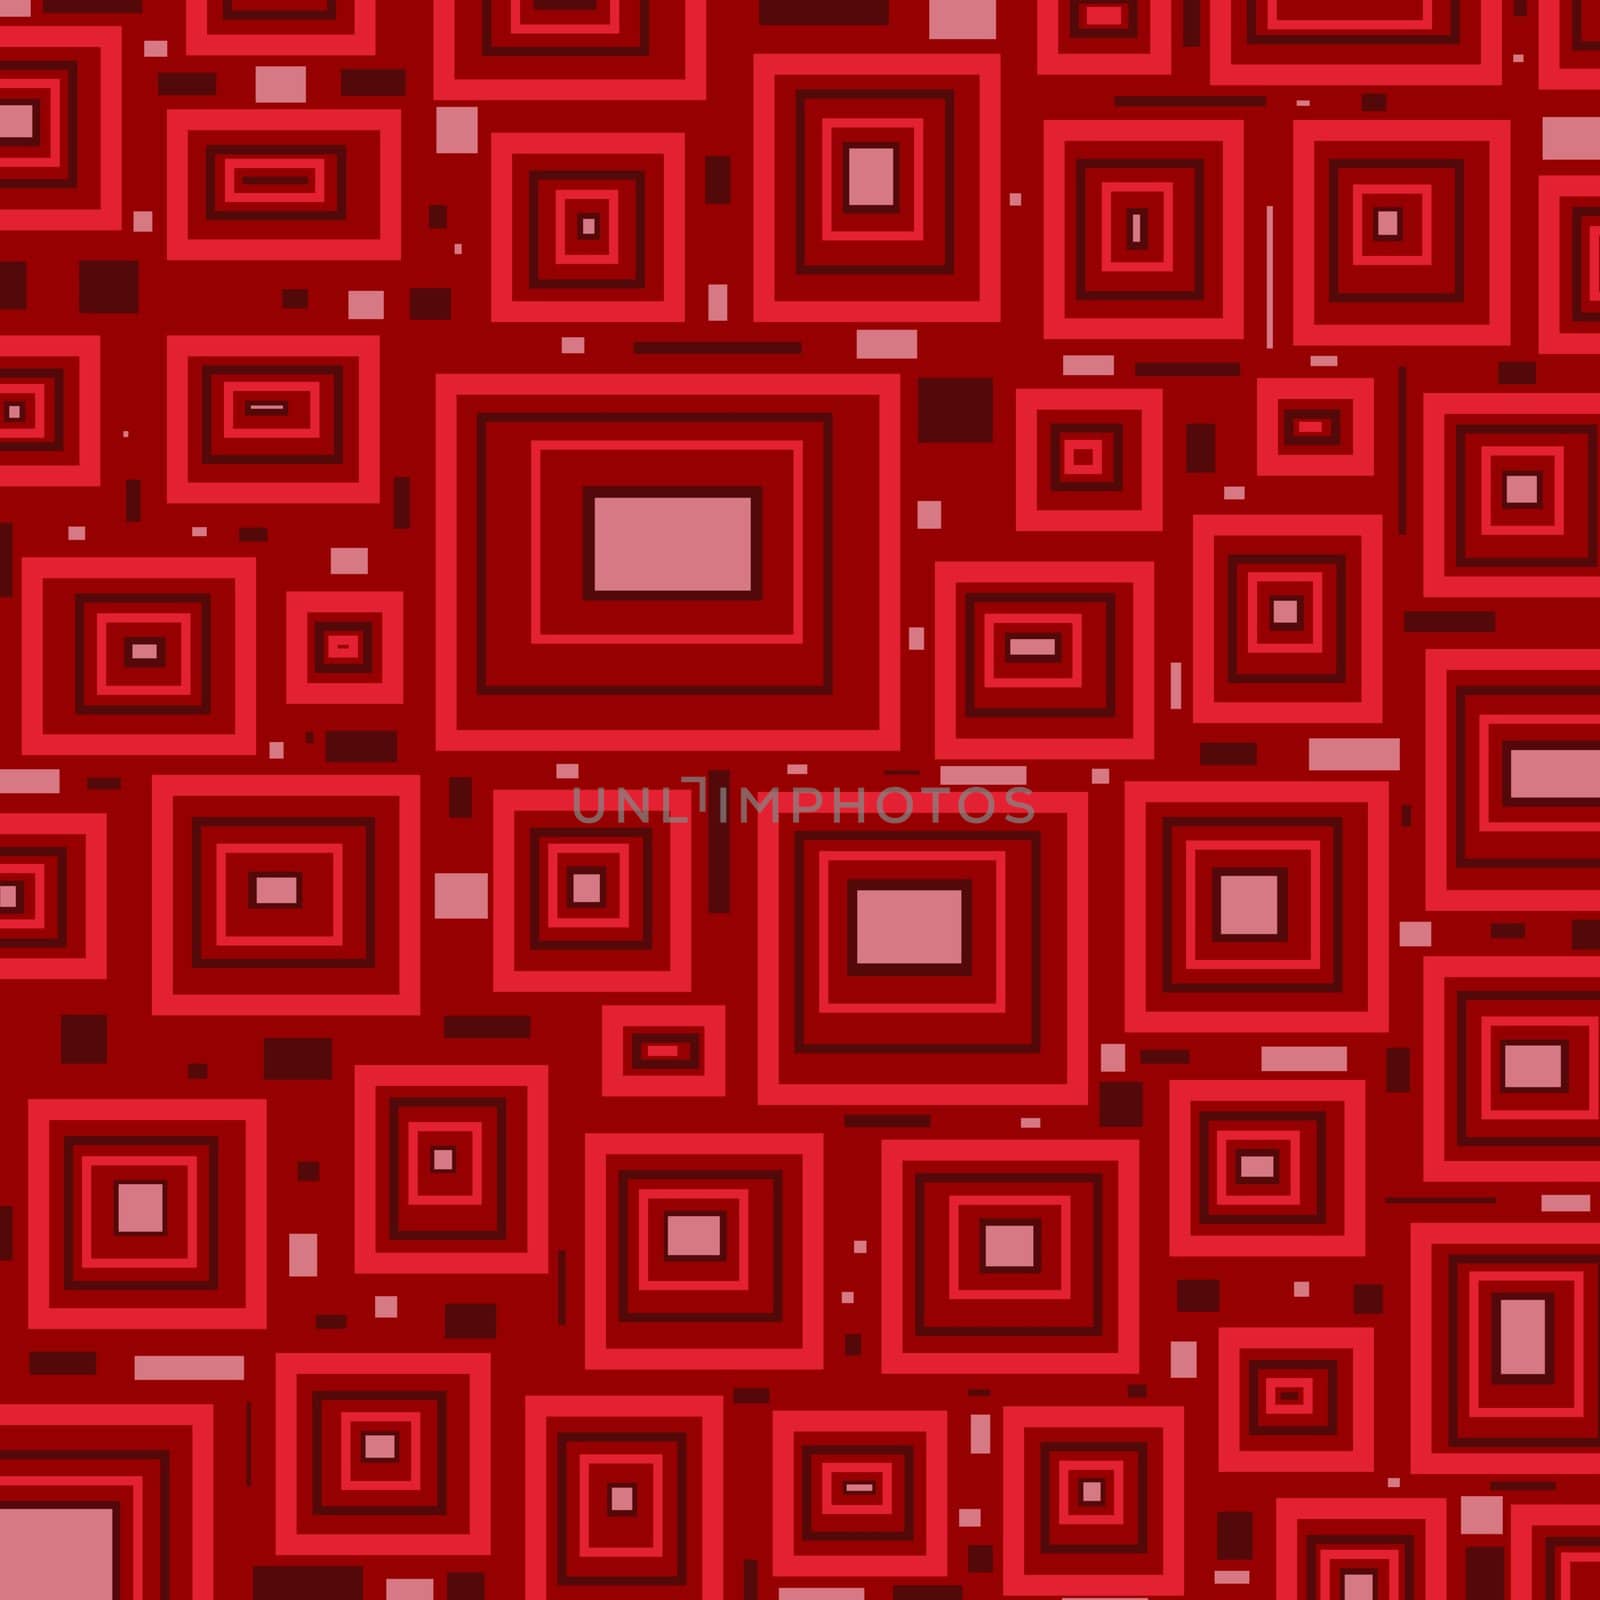 Abstract red and pink squares and rectangles